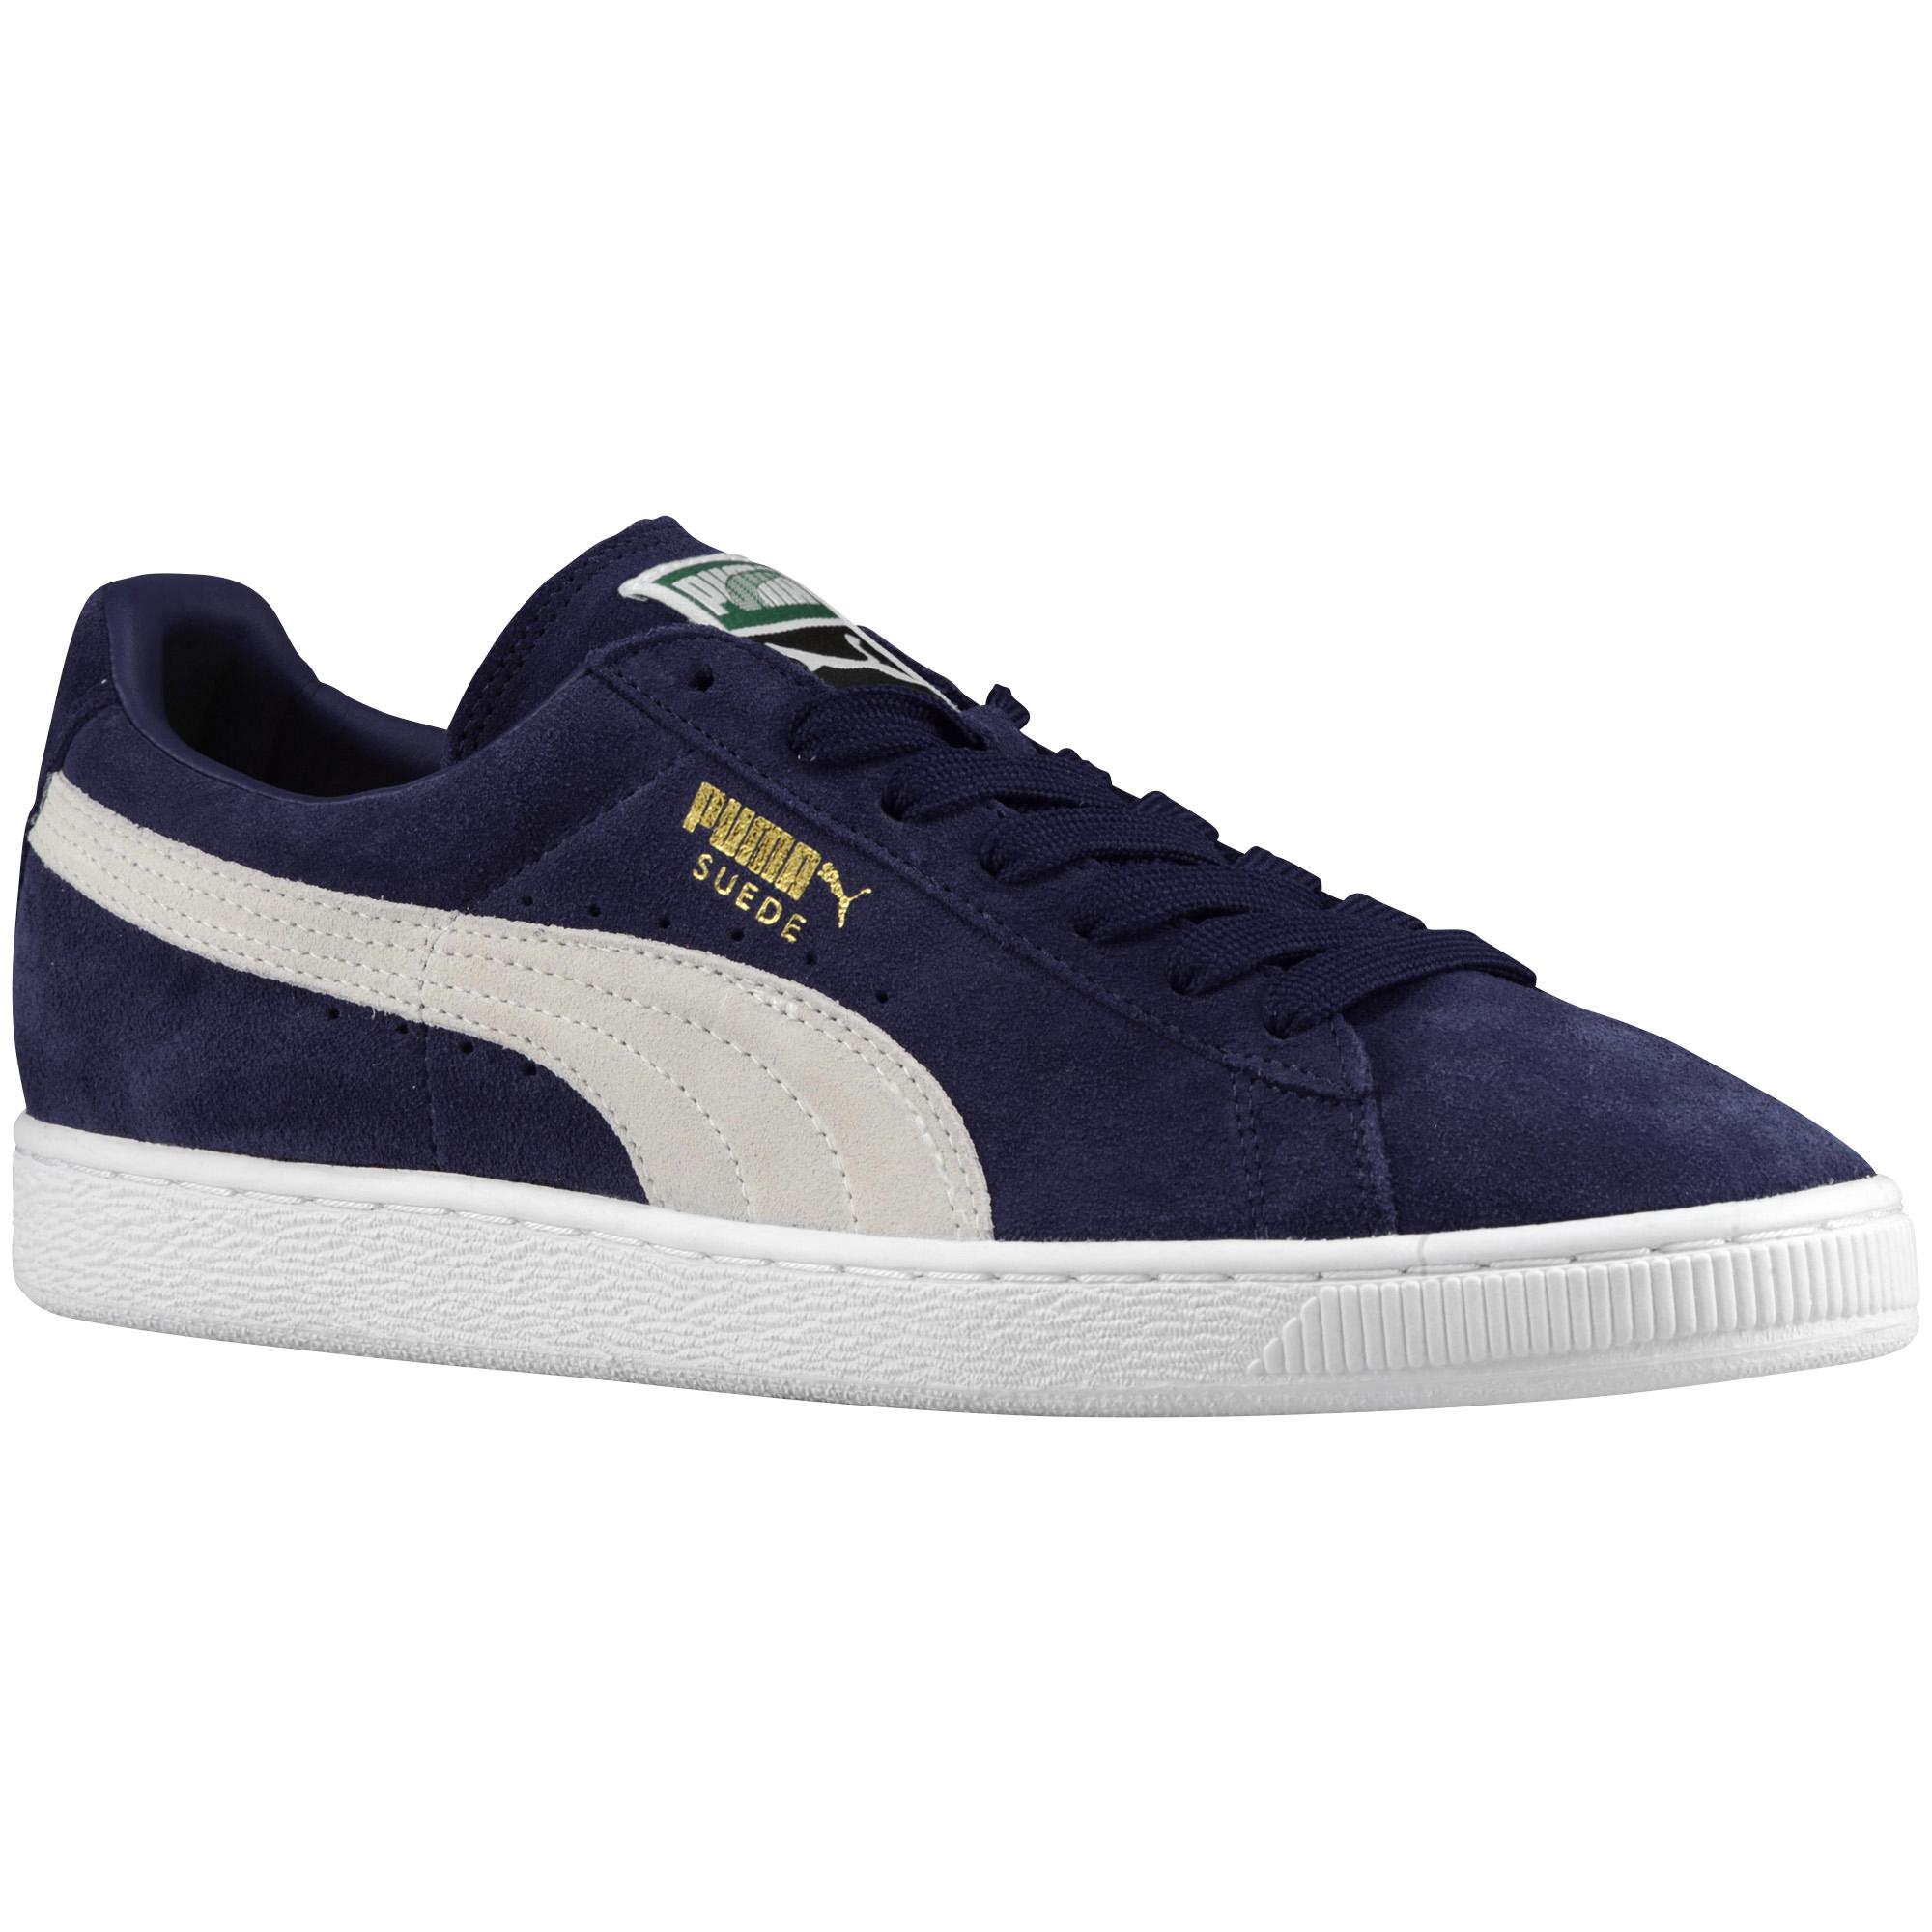 PUMA Suede Classic Basketball Shoes in Blue for Men - Lyst